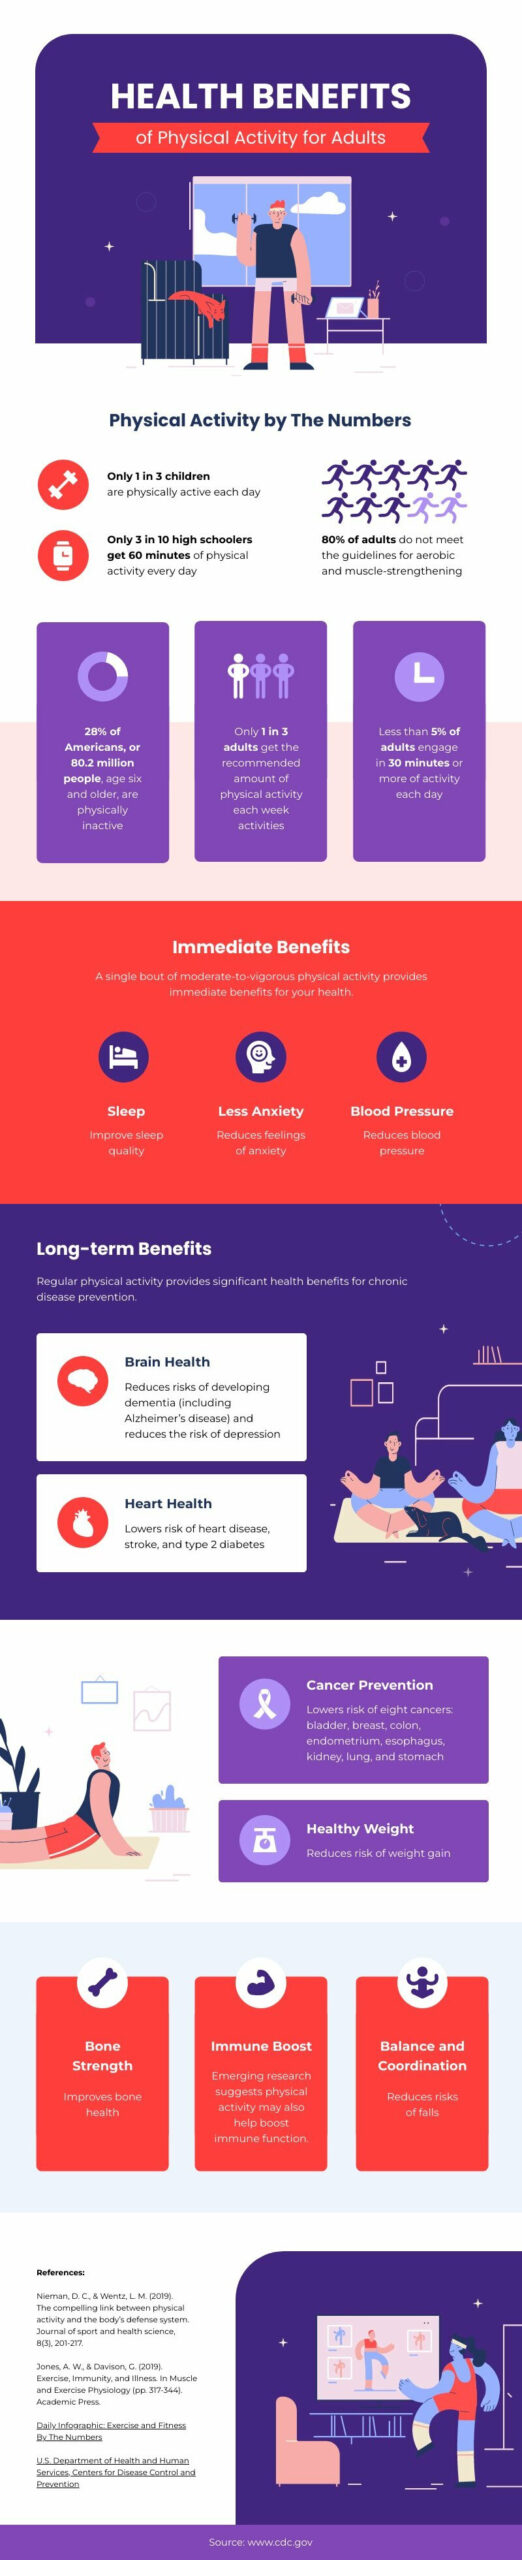 health benefits of physical activity infographic